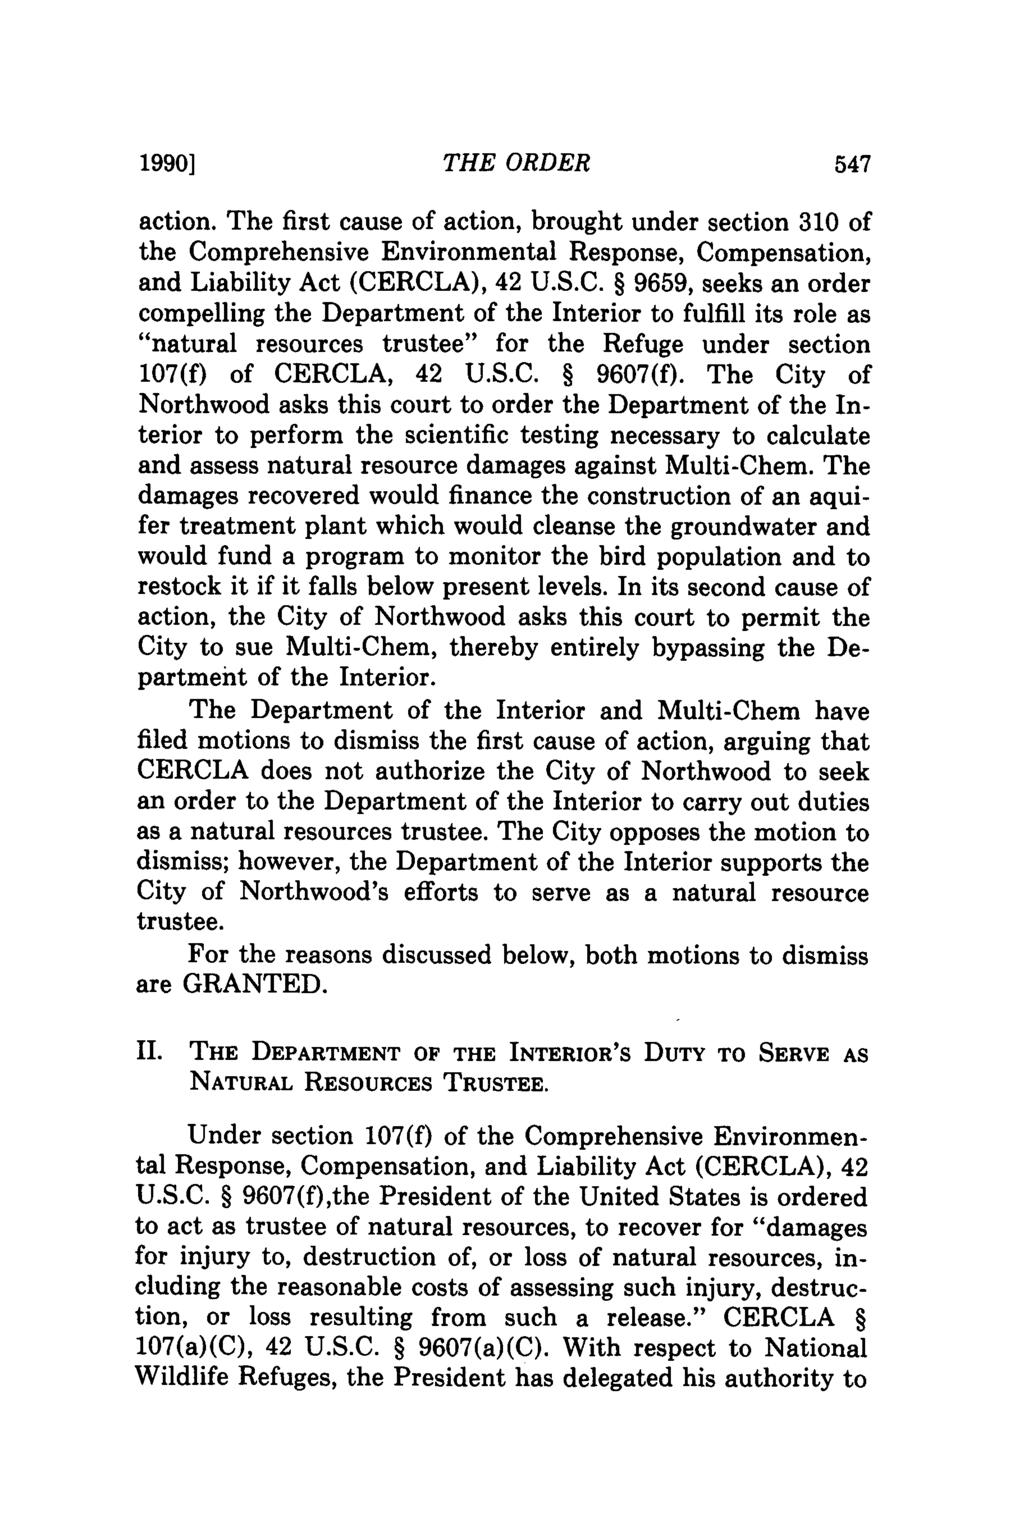 1990] THE ORDER action. The first cause of action, brought under section 310 of the Co